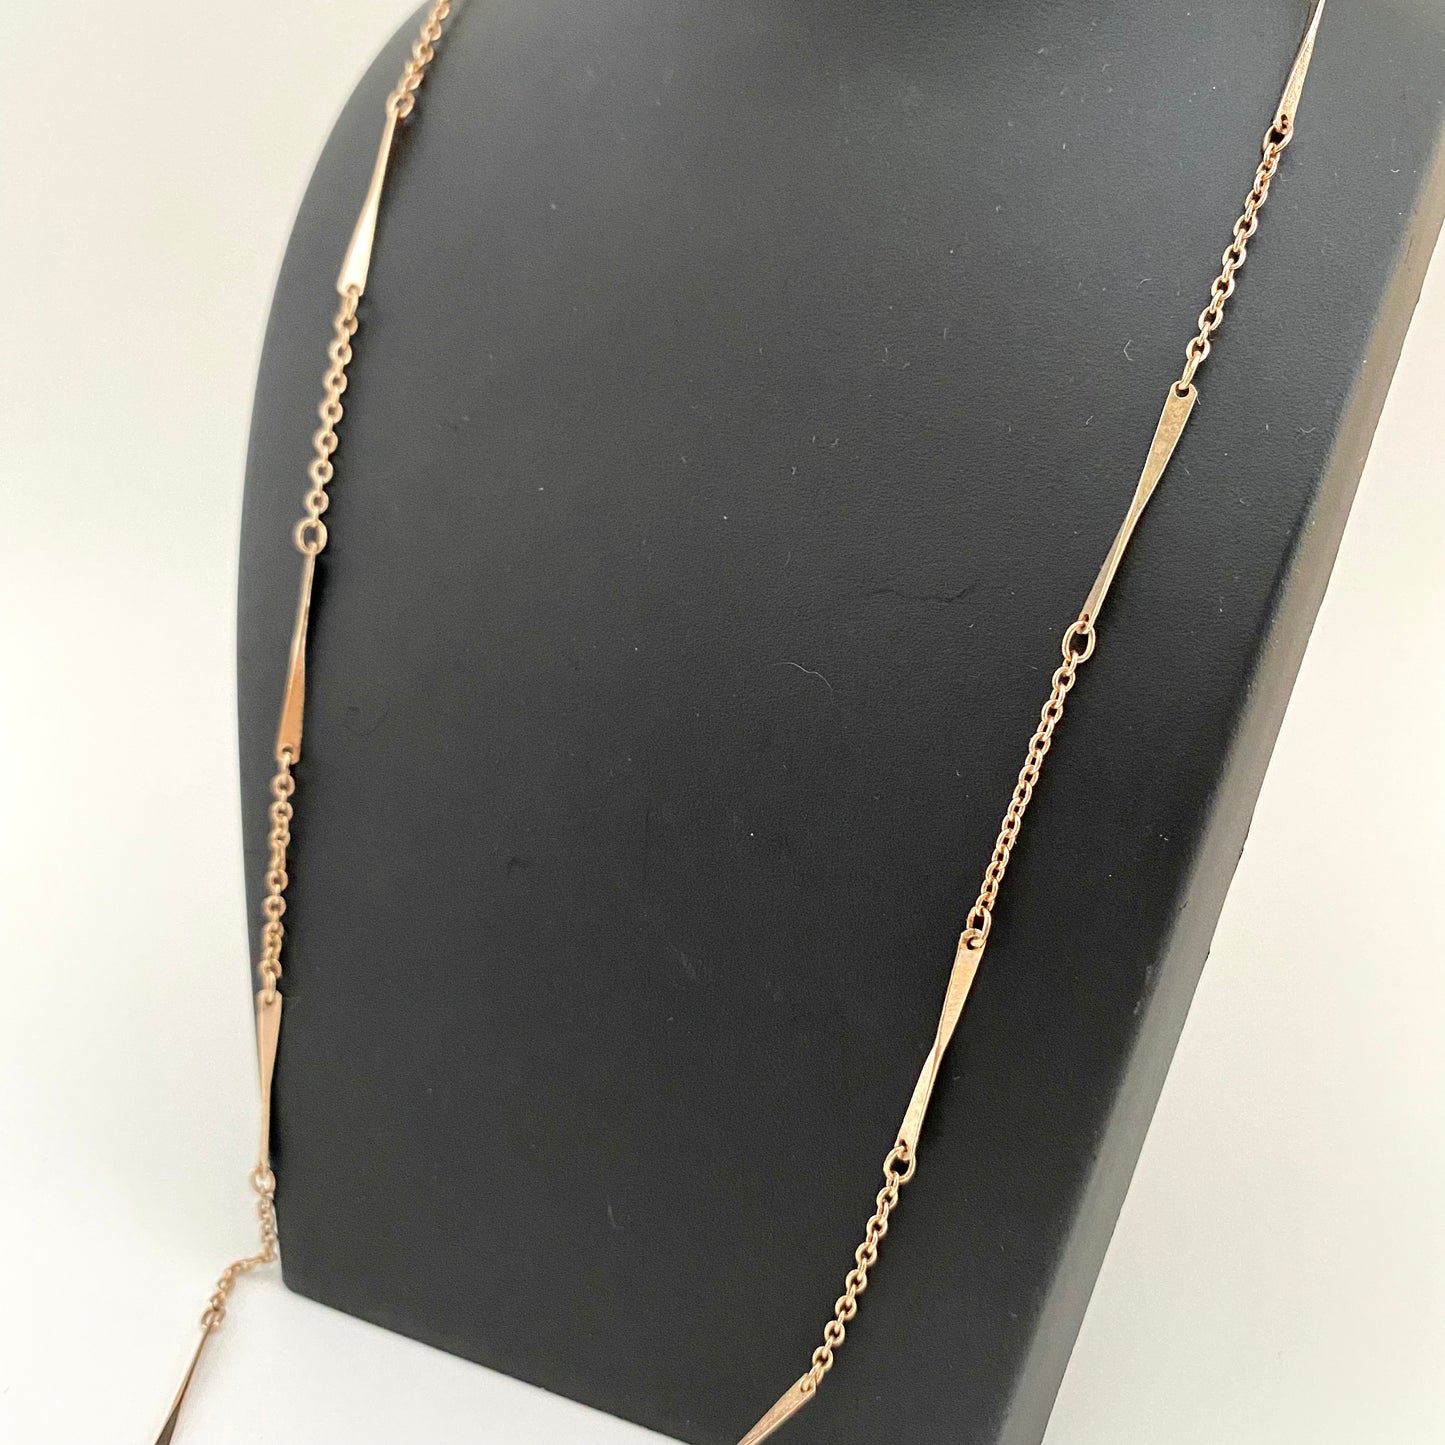 1977 Avon Chainfall Necklace- Gold